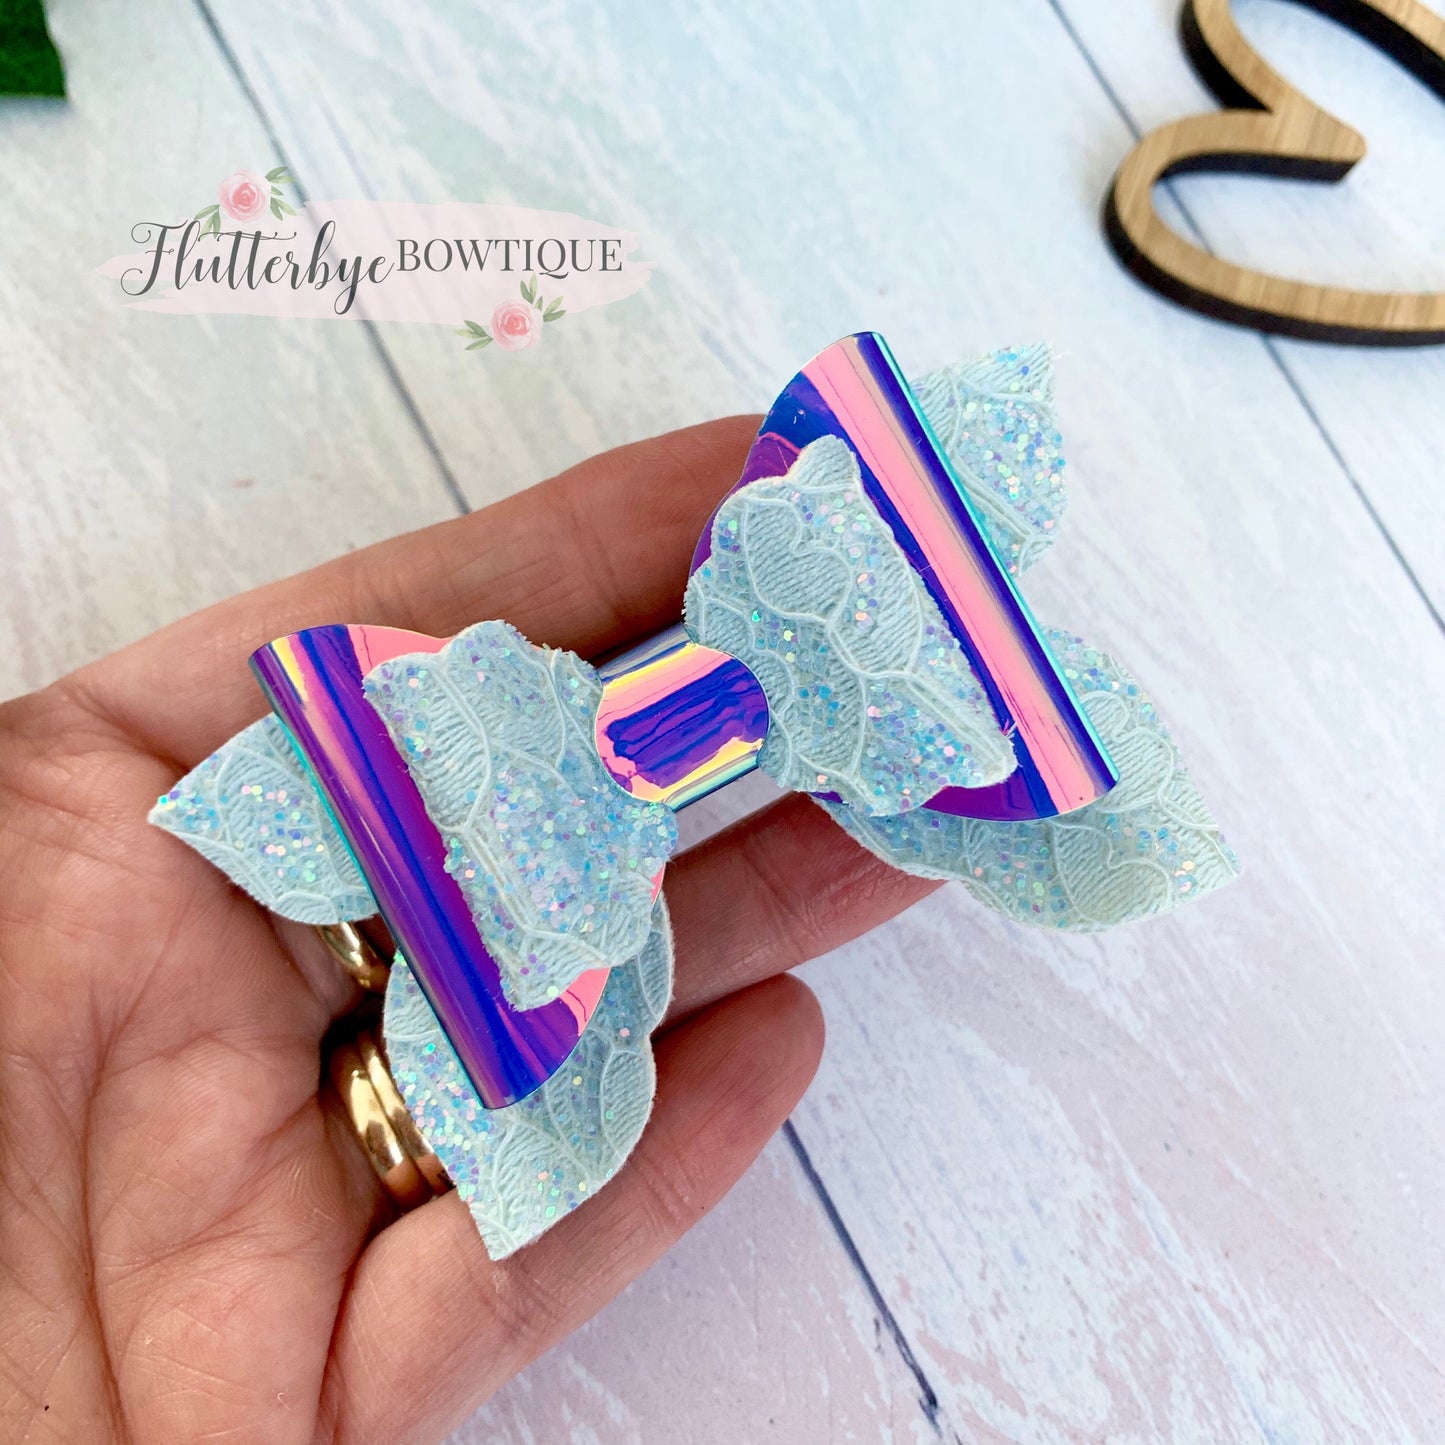 Iridescent Glitter Lace and Mirror Fairy Tails Bow